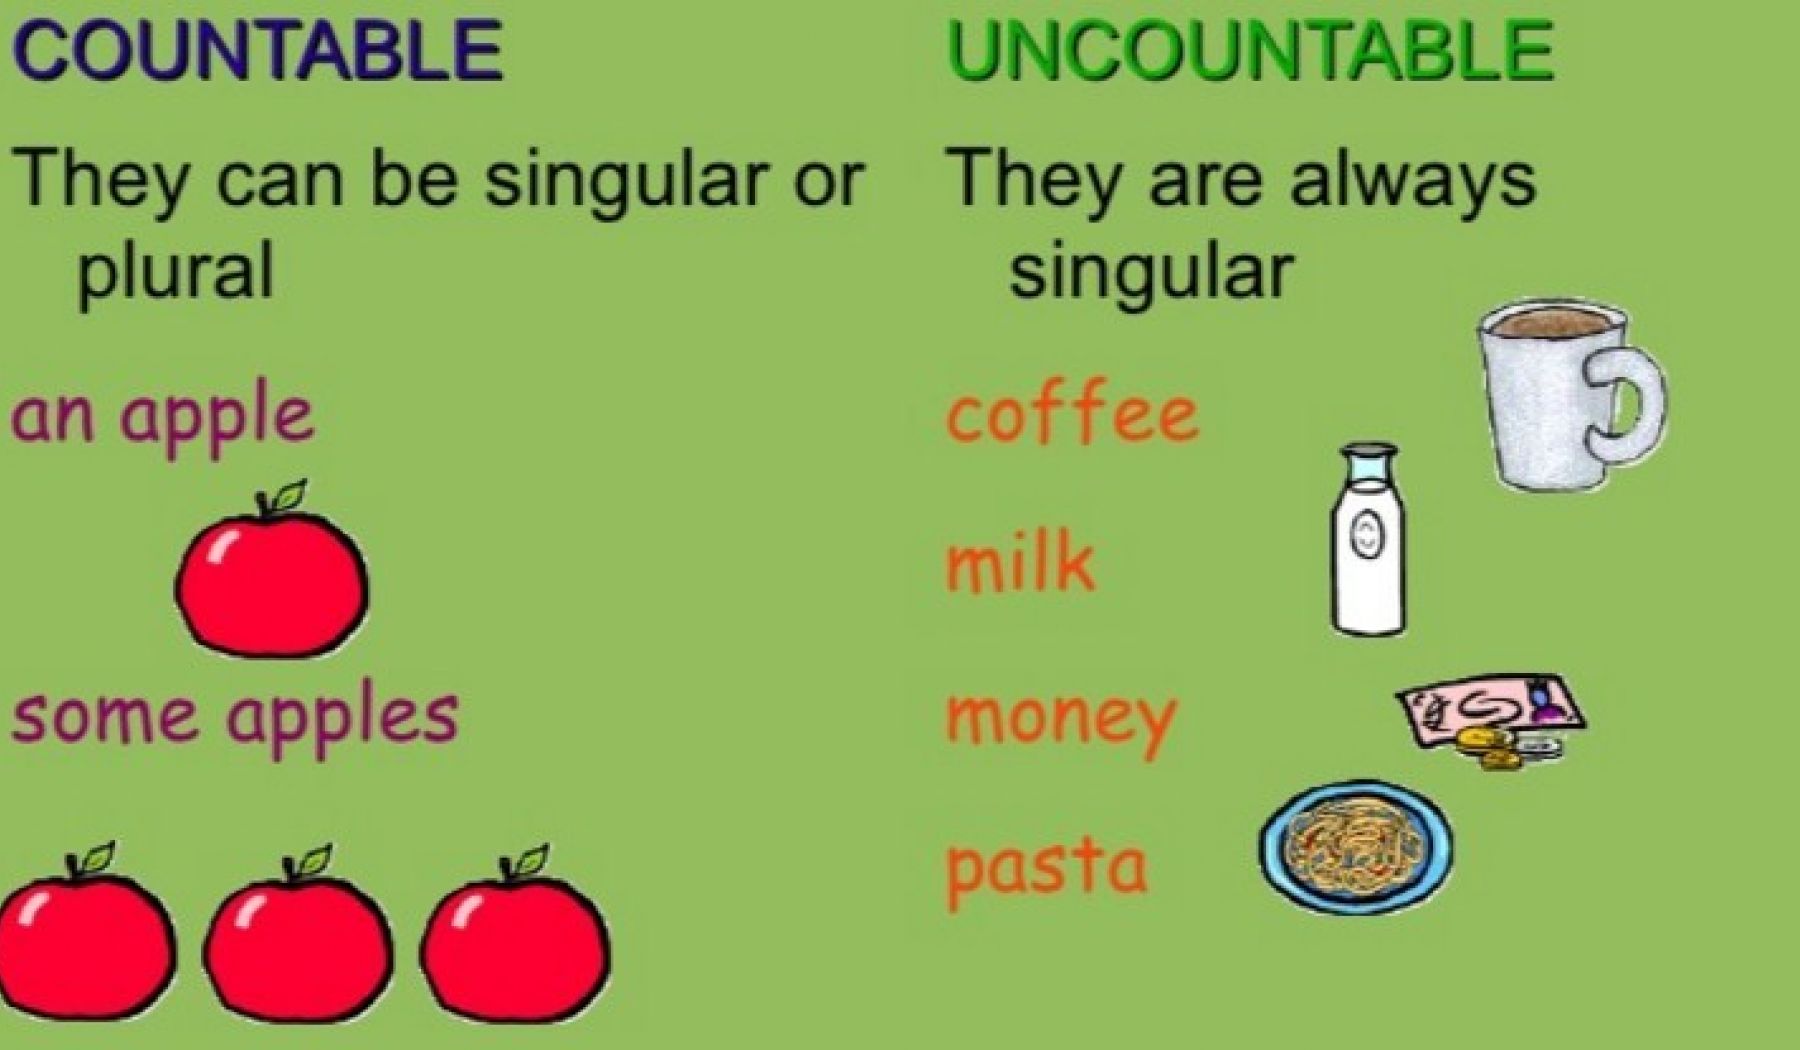 There are some apples left. Английский countable and uncountable Nouns. Countable and uncountable правило. Countable and uncountable Nouns правило. Countable and uncountable Nouns 6 класс.